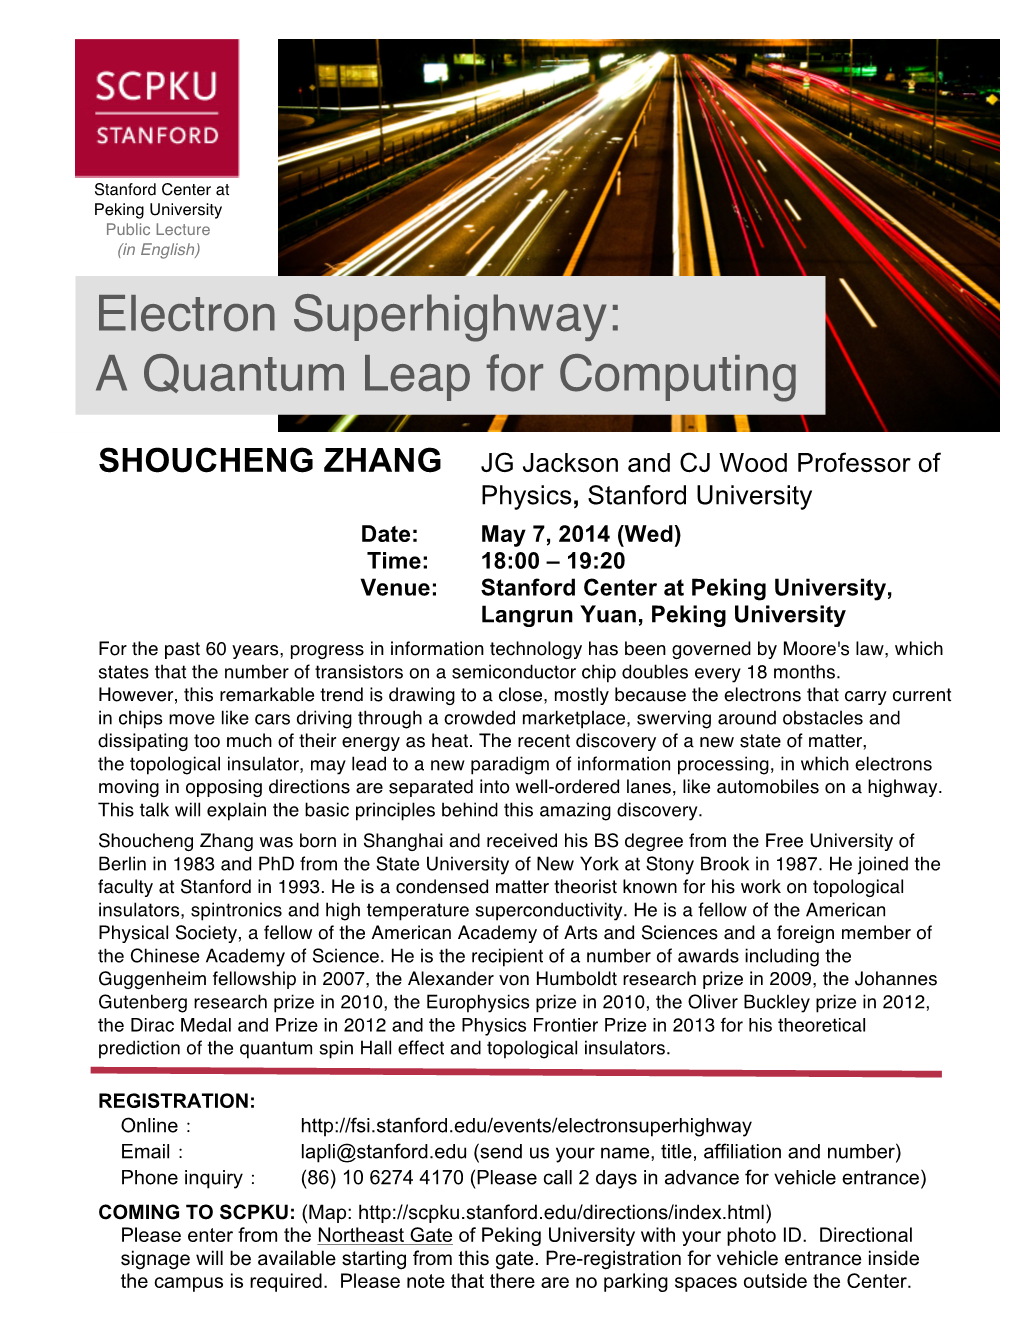 Electron Superhighway: a Quantum Leap for Computing